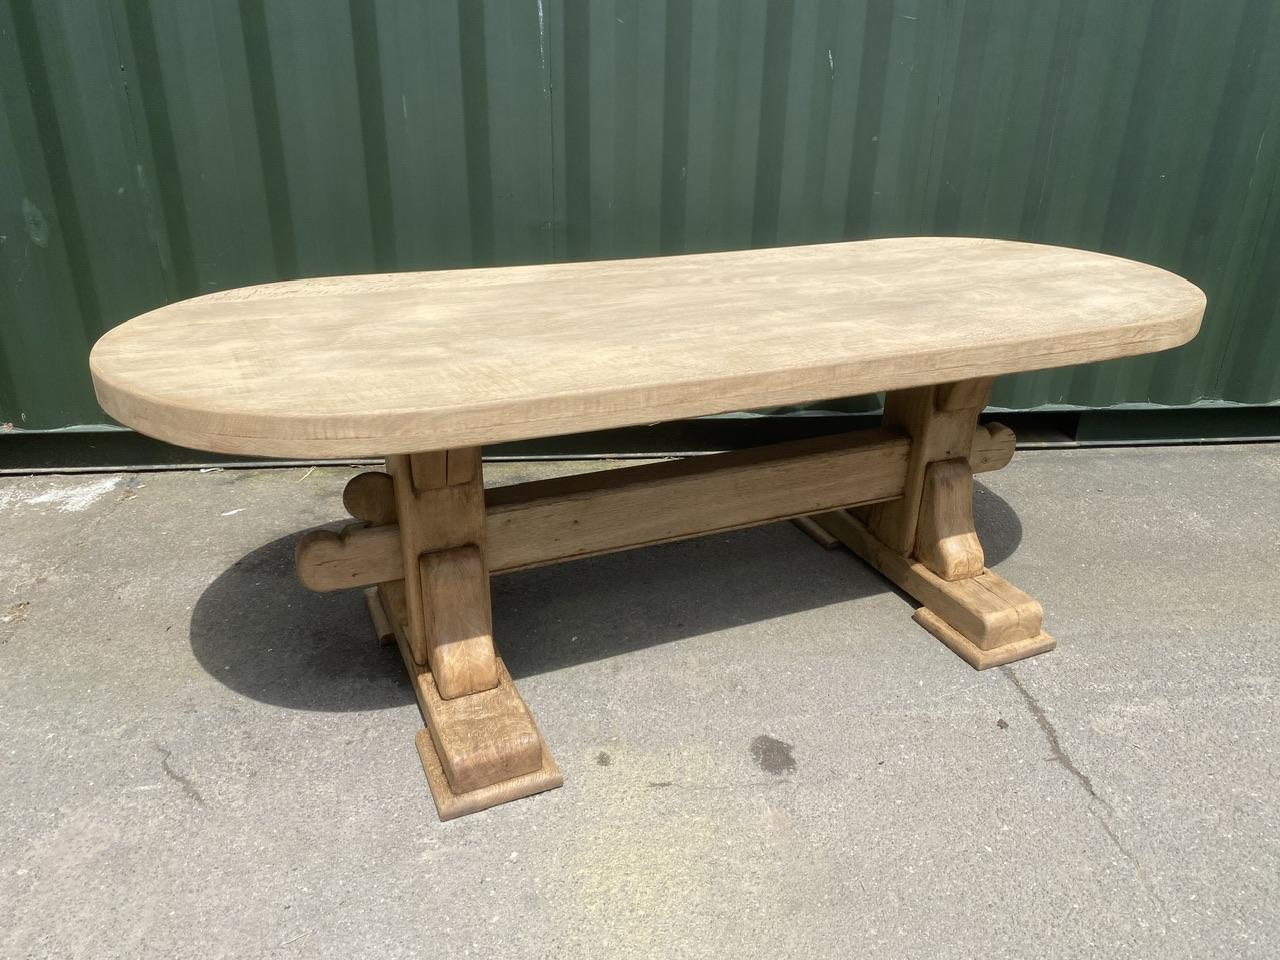 A superb example of a French Solid Oak Farmhouse Style Dining Table, excellent quality construction and a lot of Oak has been used with a super thick 7.5 cm top. The end overhang is very good and it comes fully apart if required for easy entry into